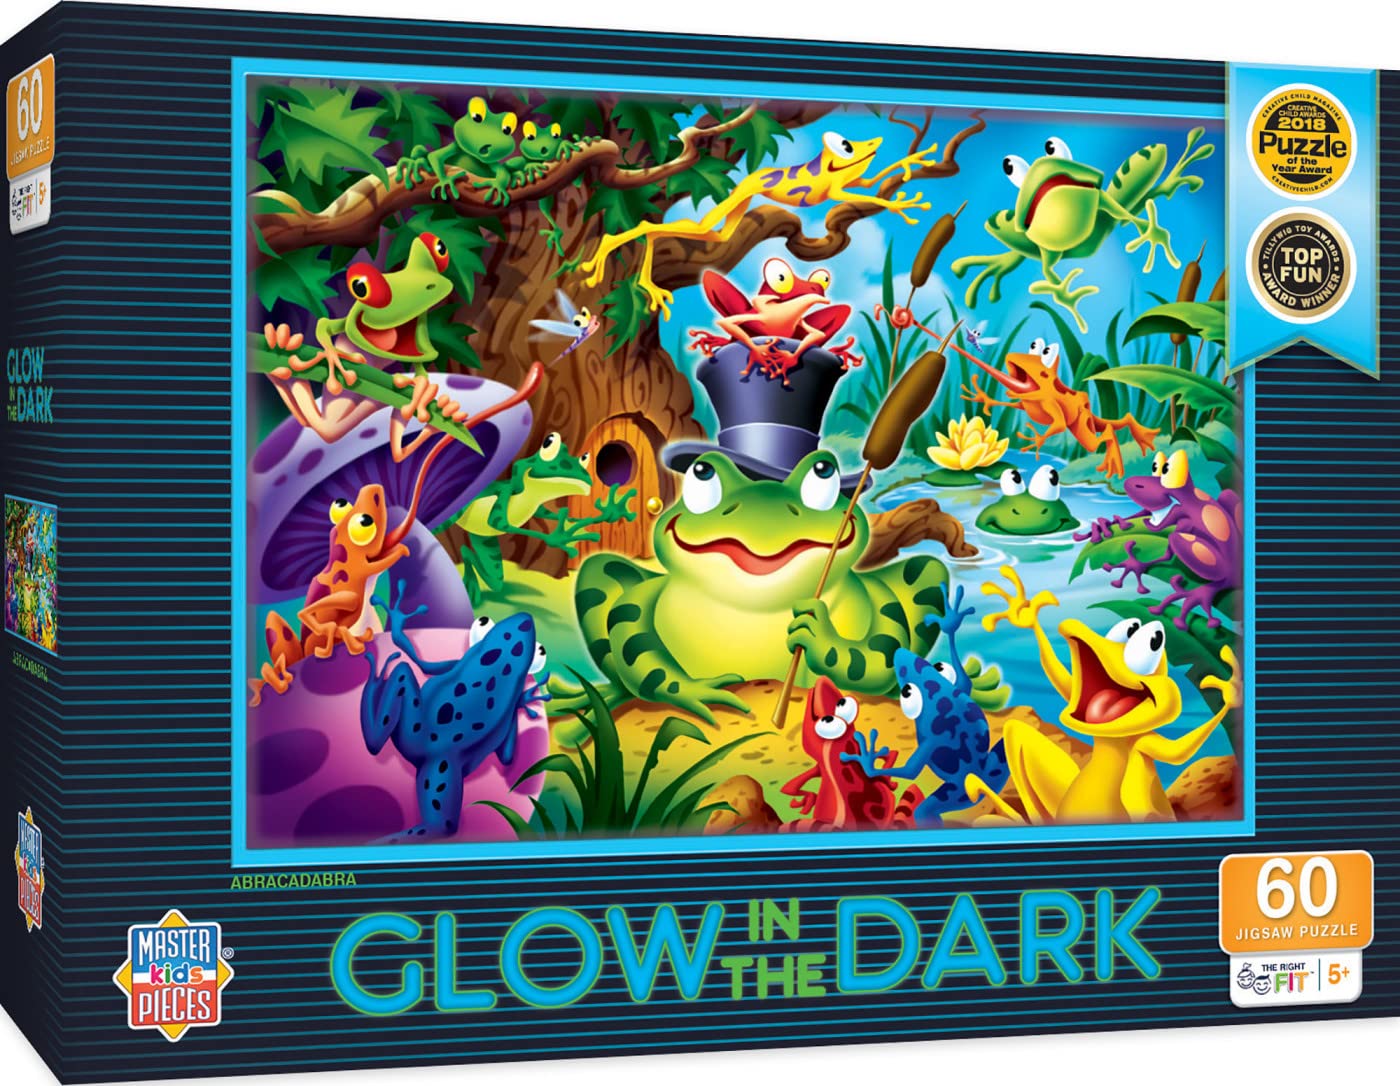 60-Piece 14"x19" MasterPieces Glow in the Dark Puzzles (Abracadabra or Singing Seahorses) $7.90 + Free Shipping w/ Prime or on orders over $35